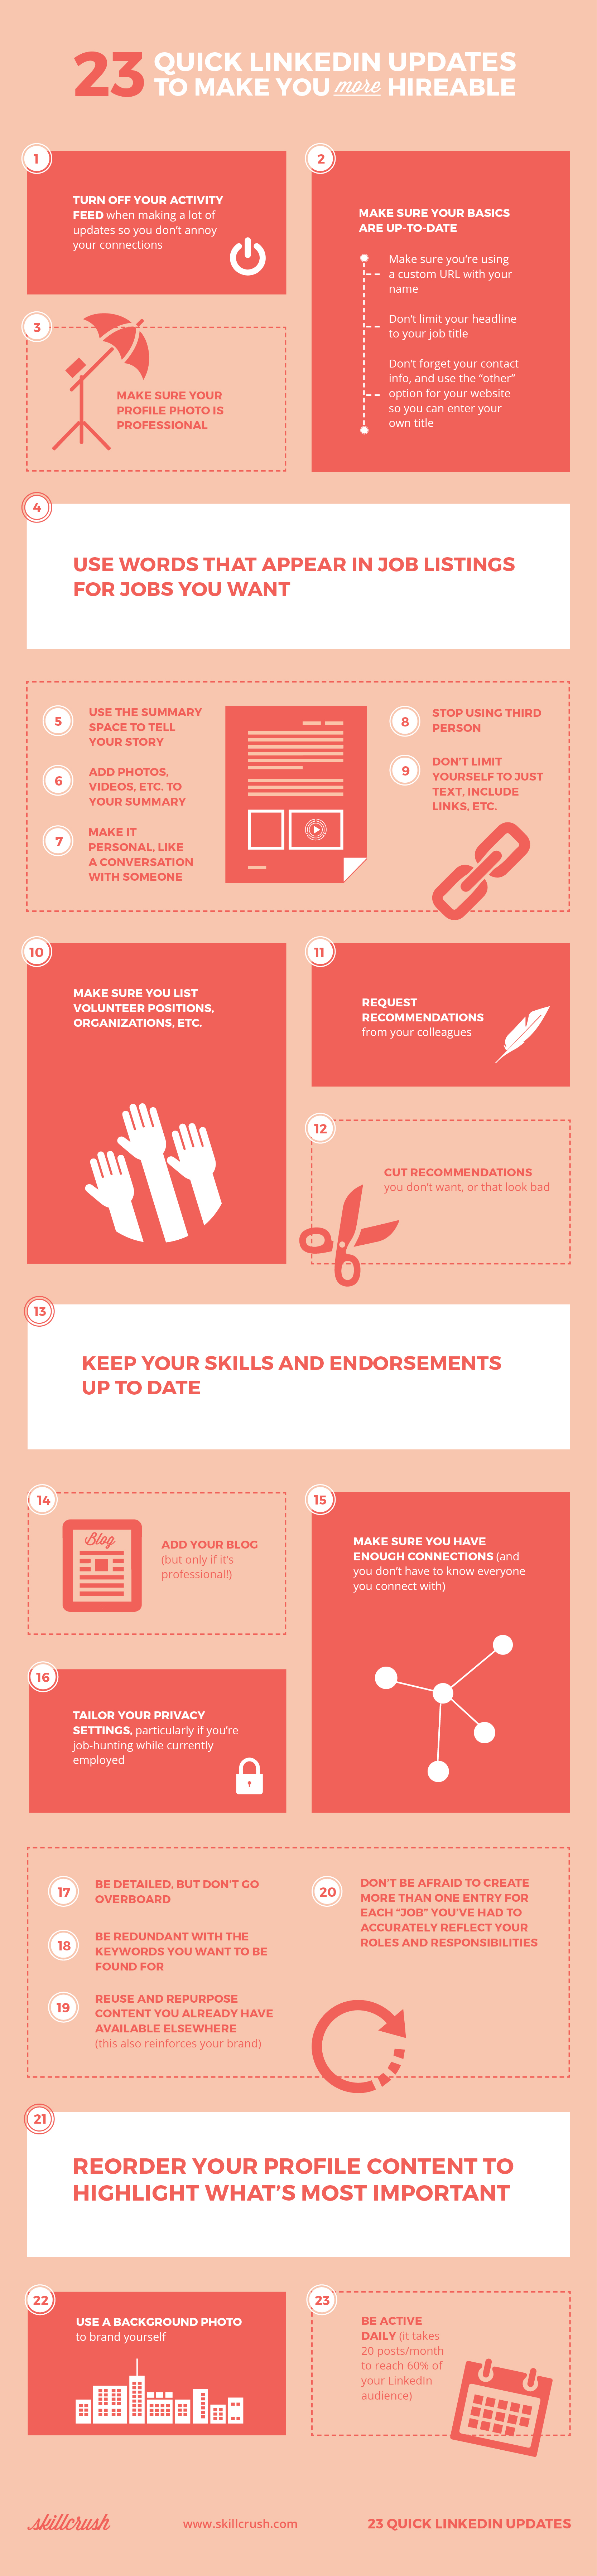 infographic-23-quick-and-easy-linkedin-updates-to-get-hired-now